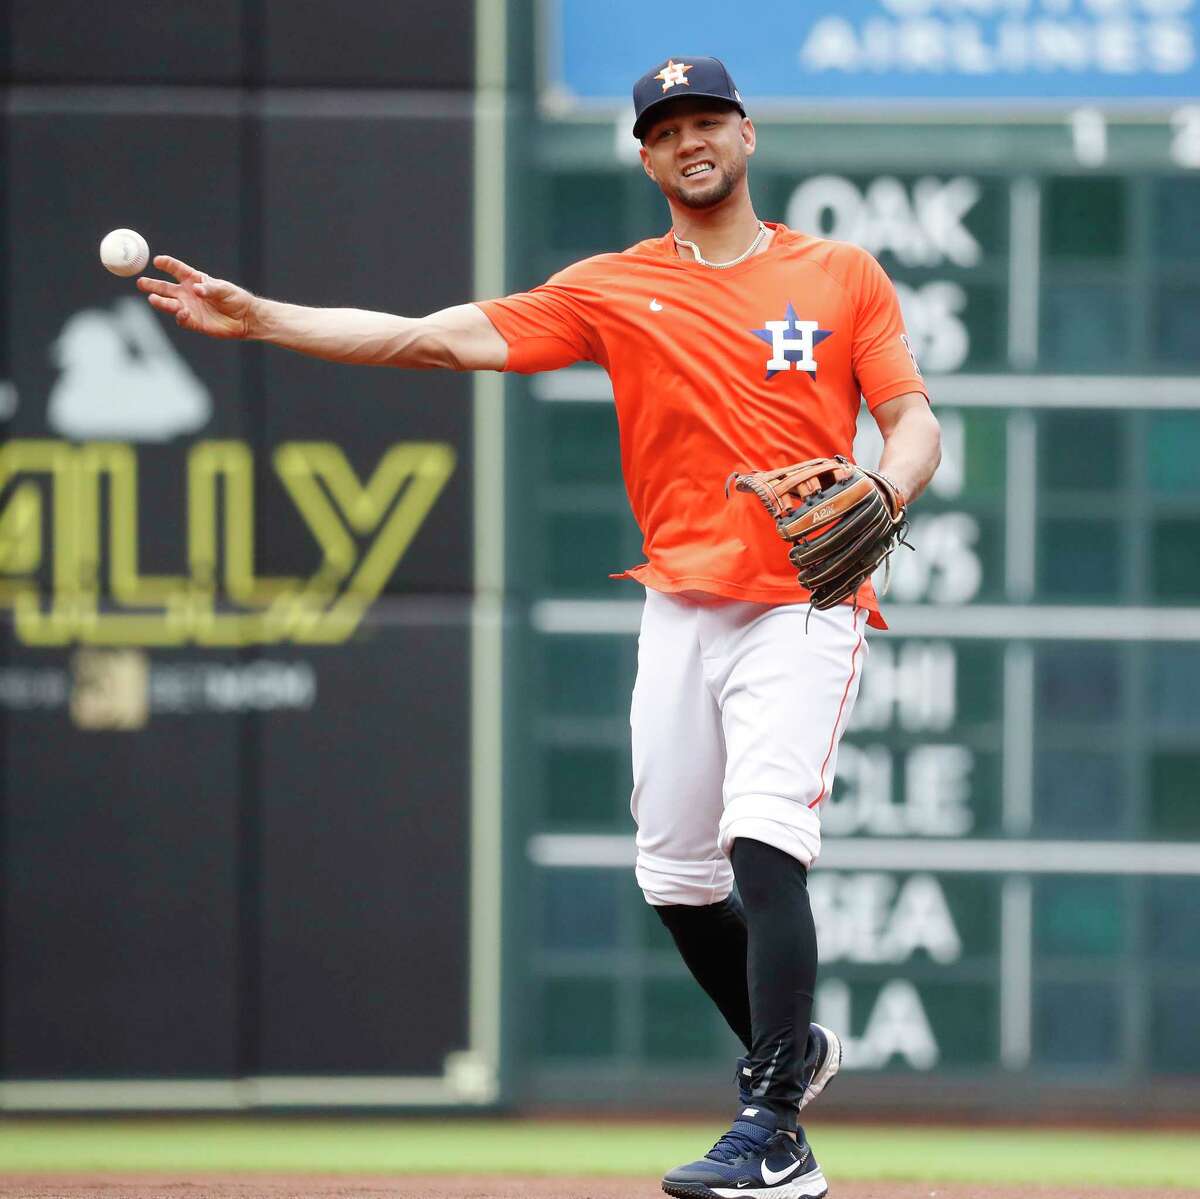 Houston Astros Yuli Gurriel takes infield practice at second base before the start of an MLB baseball game at Minute Maid Park, Thursday, May 13, 2021, in Houston.